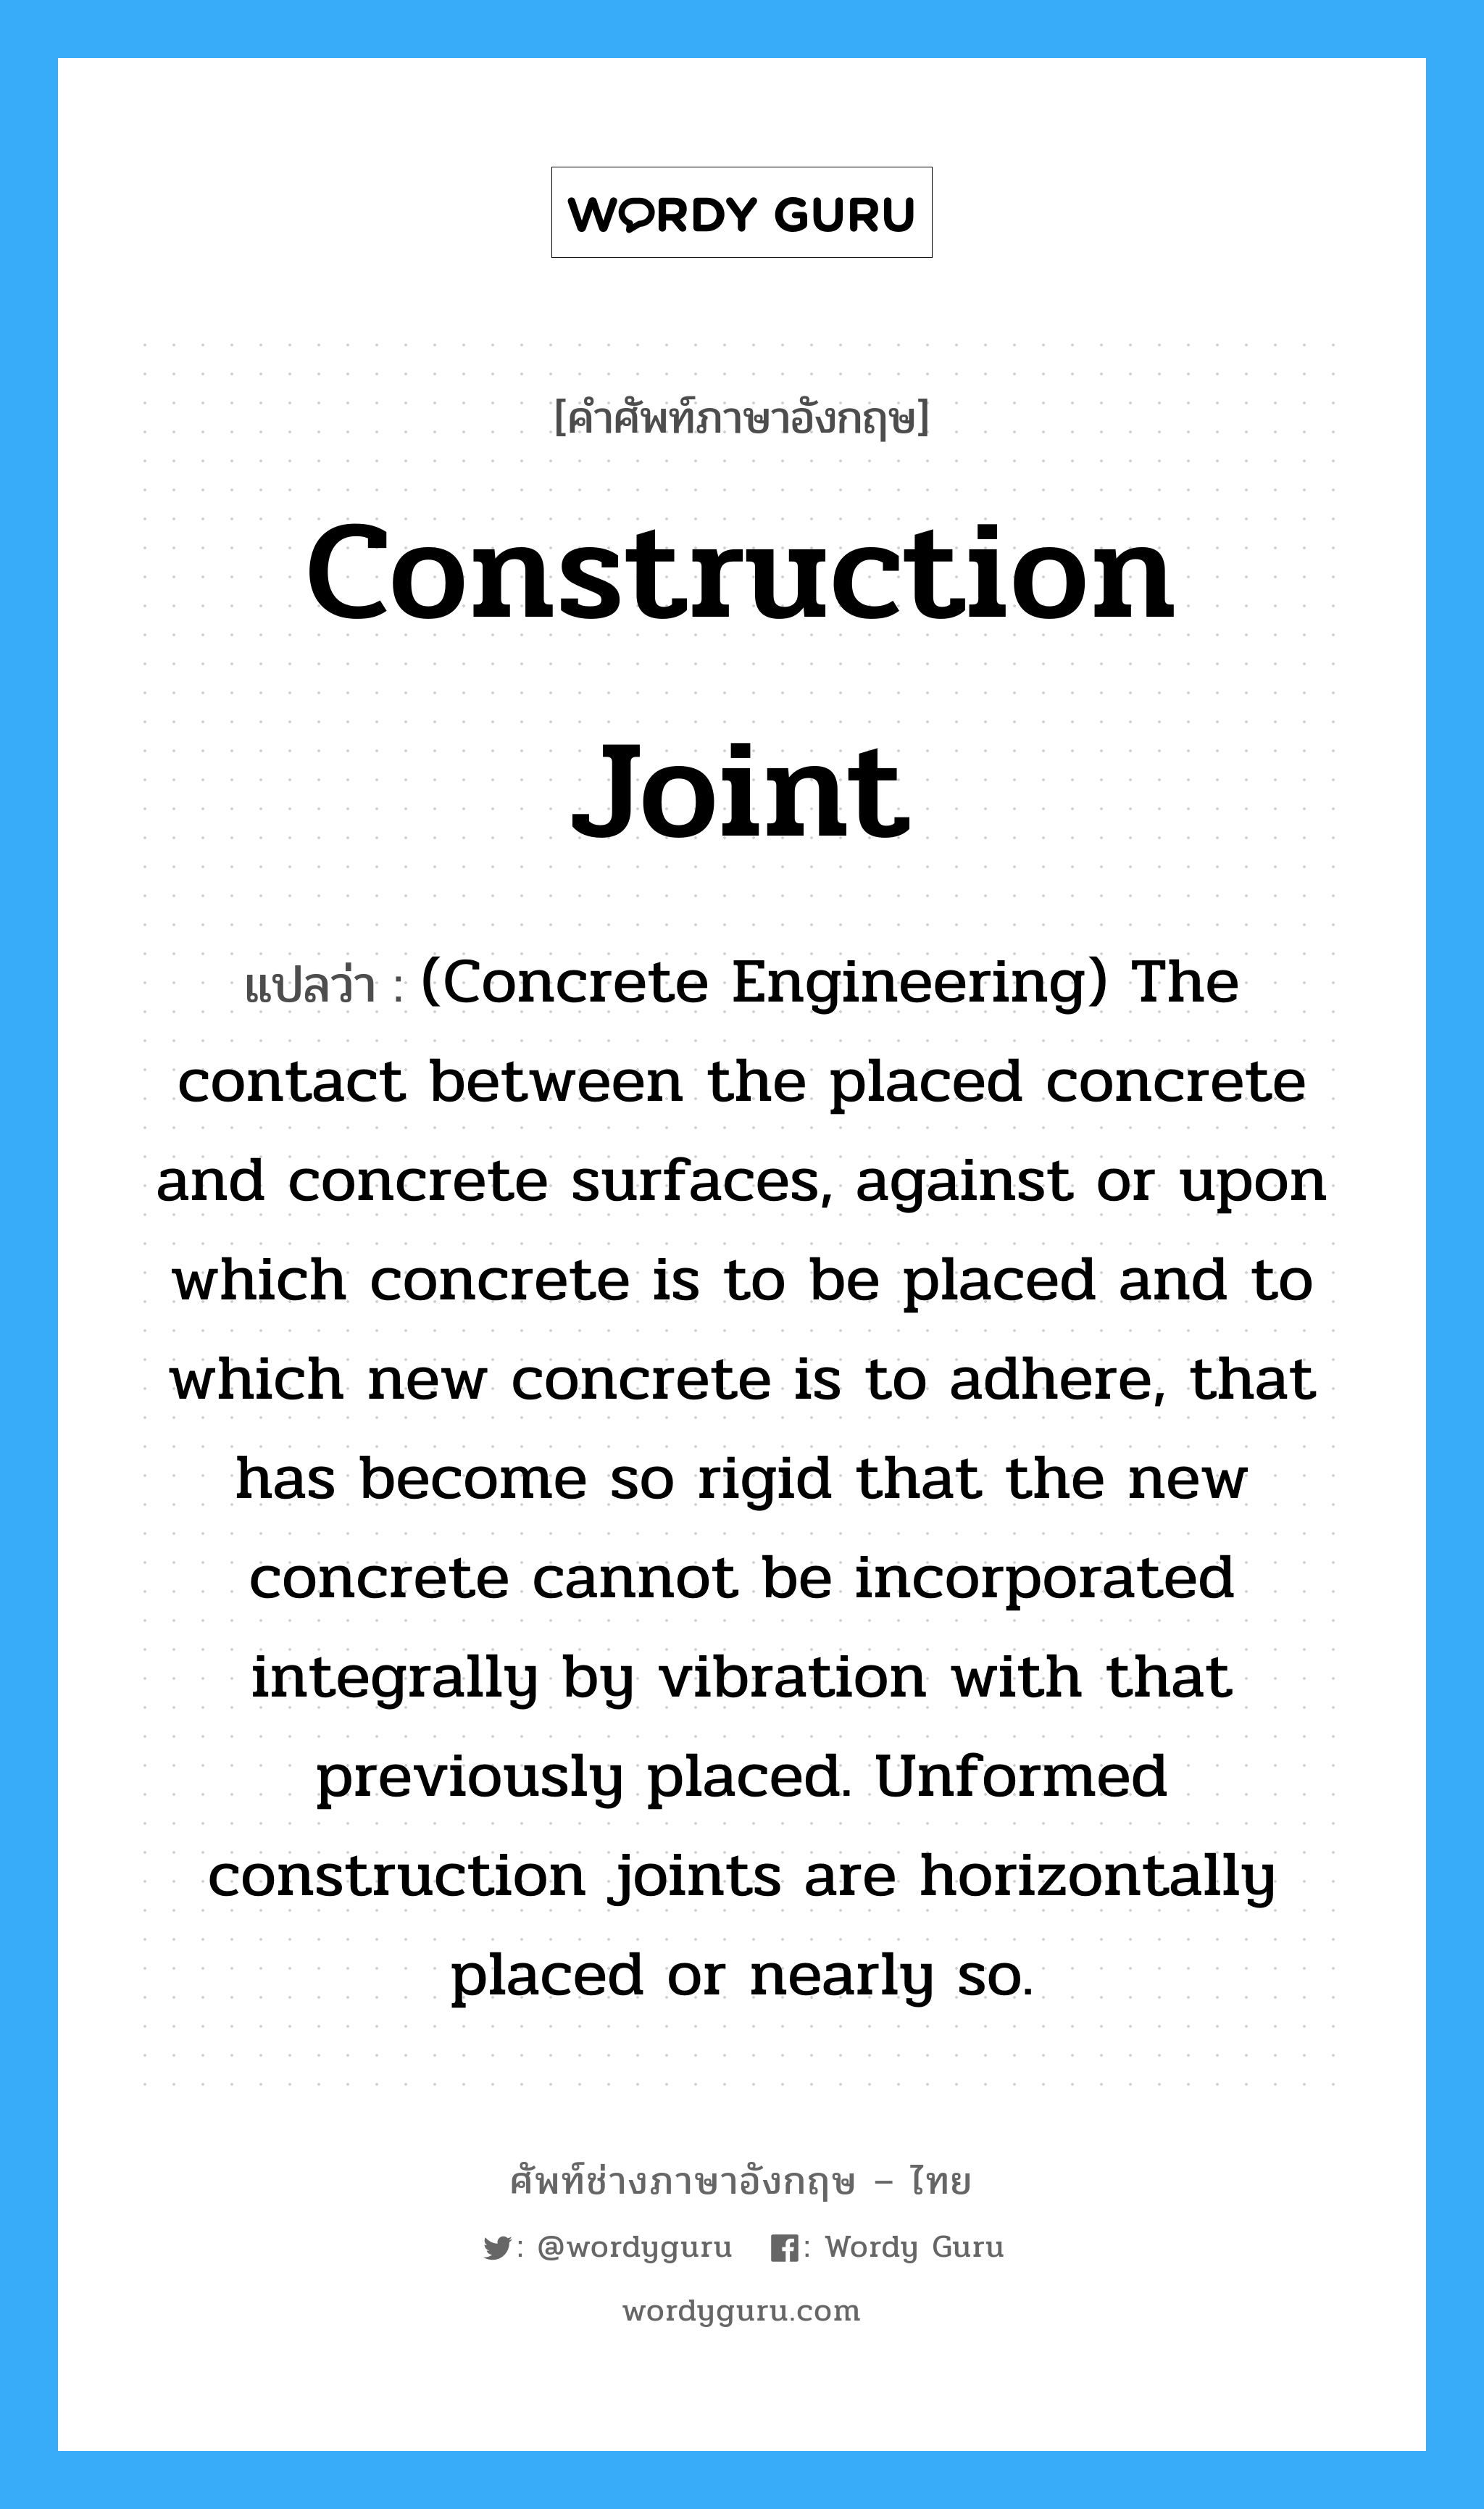 Construction Joint แปลว่า?, คำศัพท์ช่างภาษาอังกฤษ - ไทย Construction Joint คำศัพท์ภาษาอังกฤษ Construction Joint แปลว่า (Concrete Engineering) The contact between the placed concrete and concrete surfaces, against or upon which concrete is to be placed and to which new concrete is to adhere, that has become so rigid that the new concrete cannot be incorporated integrally by vibration with that previously placed. Unformed construction joints are horizontally placed or nearly so.